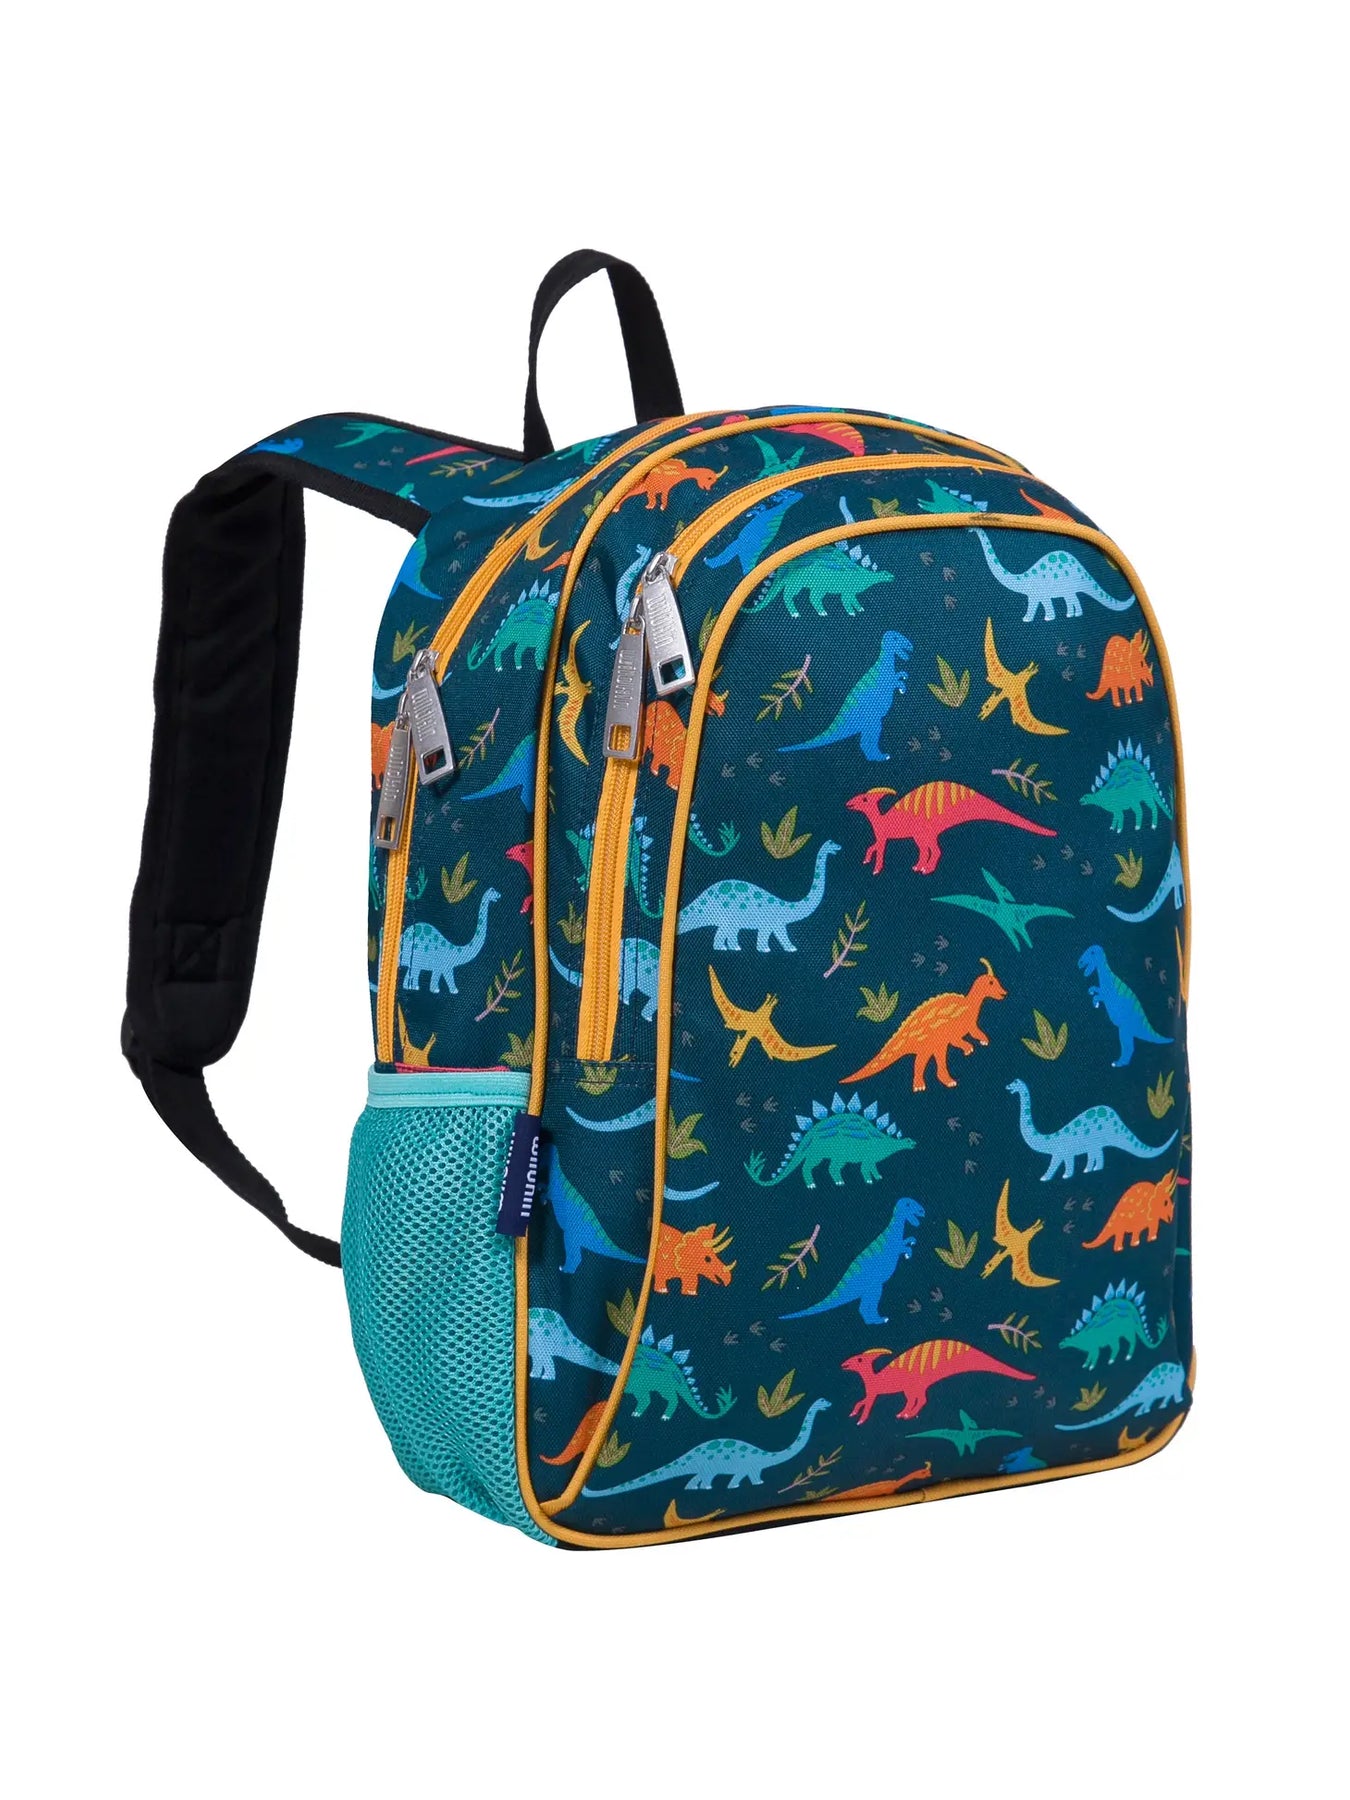 Wildkin Jurassic Dinosaurs Two Compartment Lunch Bag